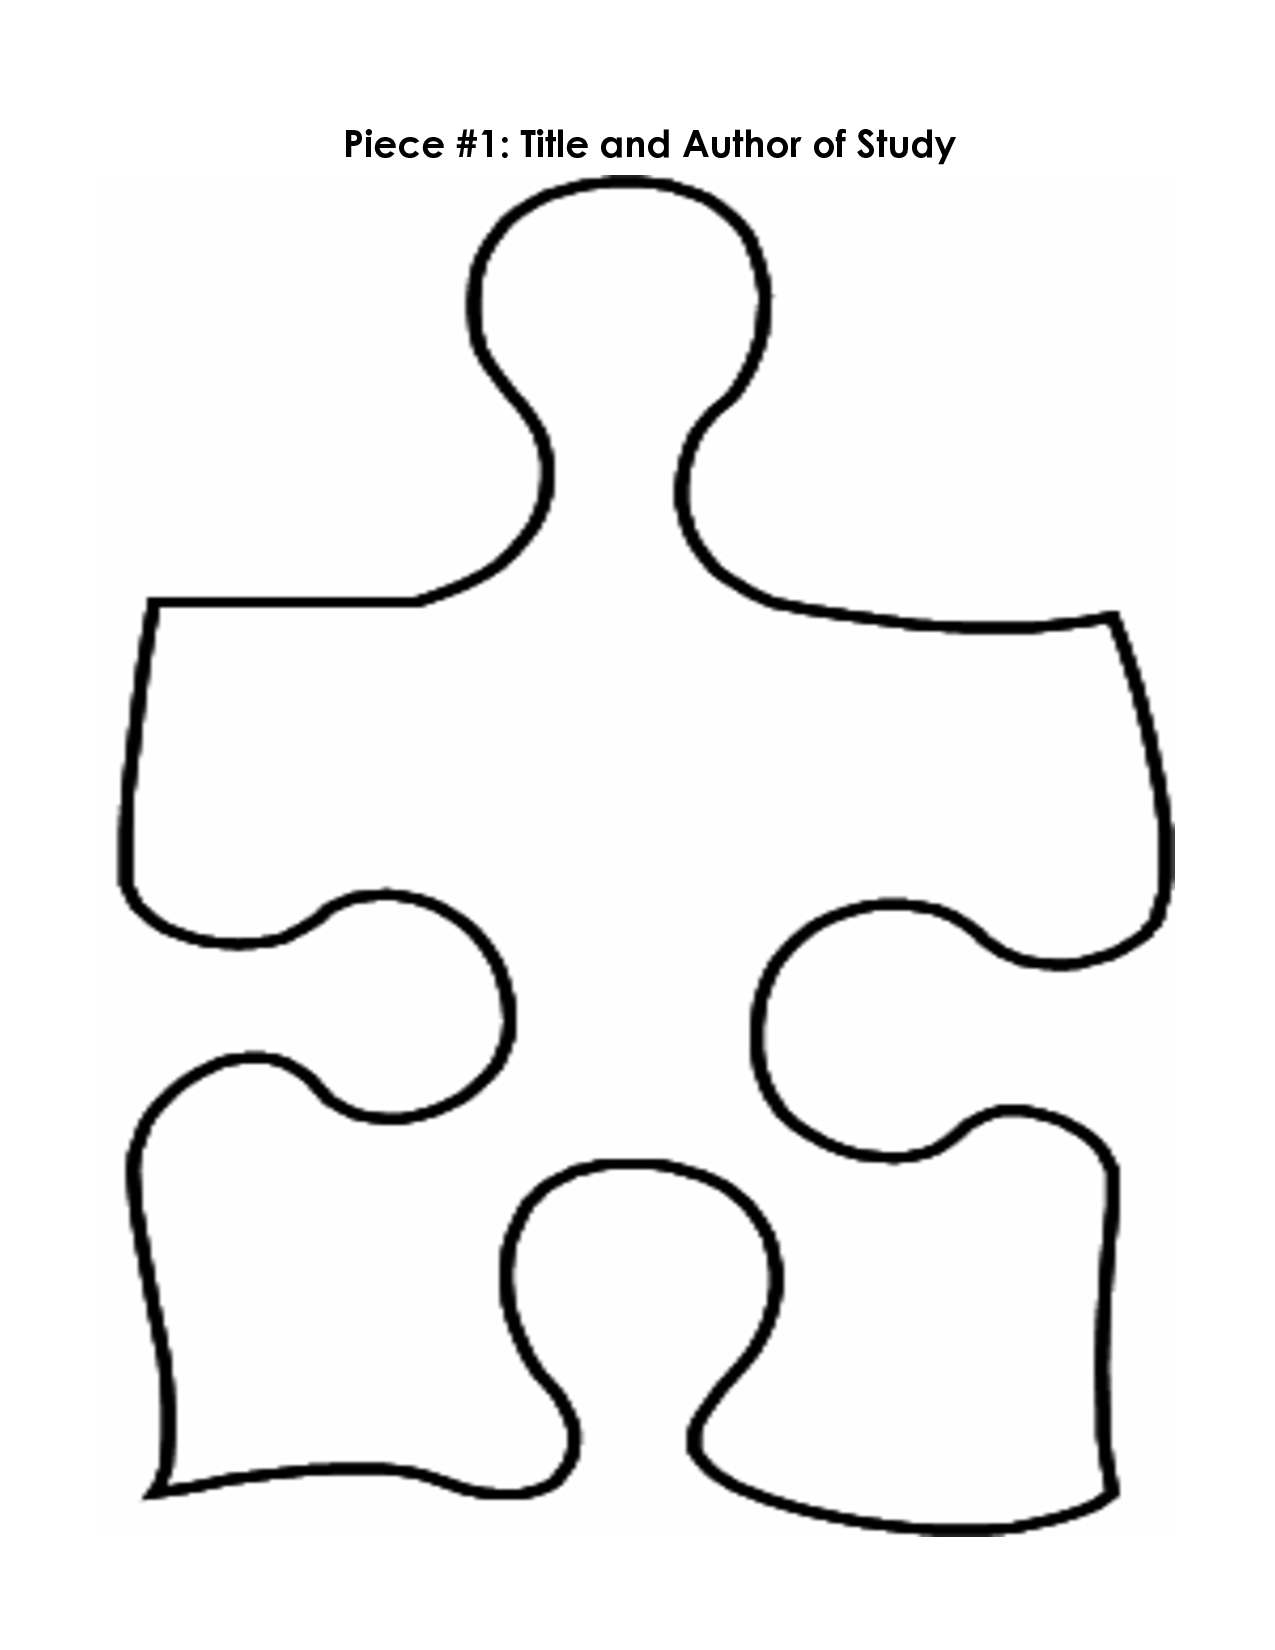 Free Puzzle Pieces Template, Download Free Clip Art, Free Clip Art - Printable Pictures Of Puzzle Pieces